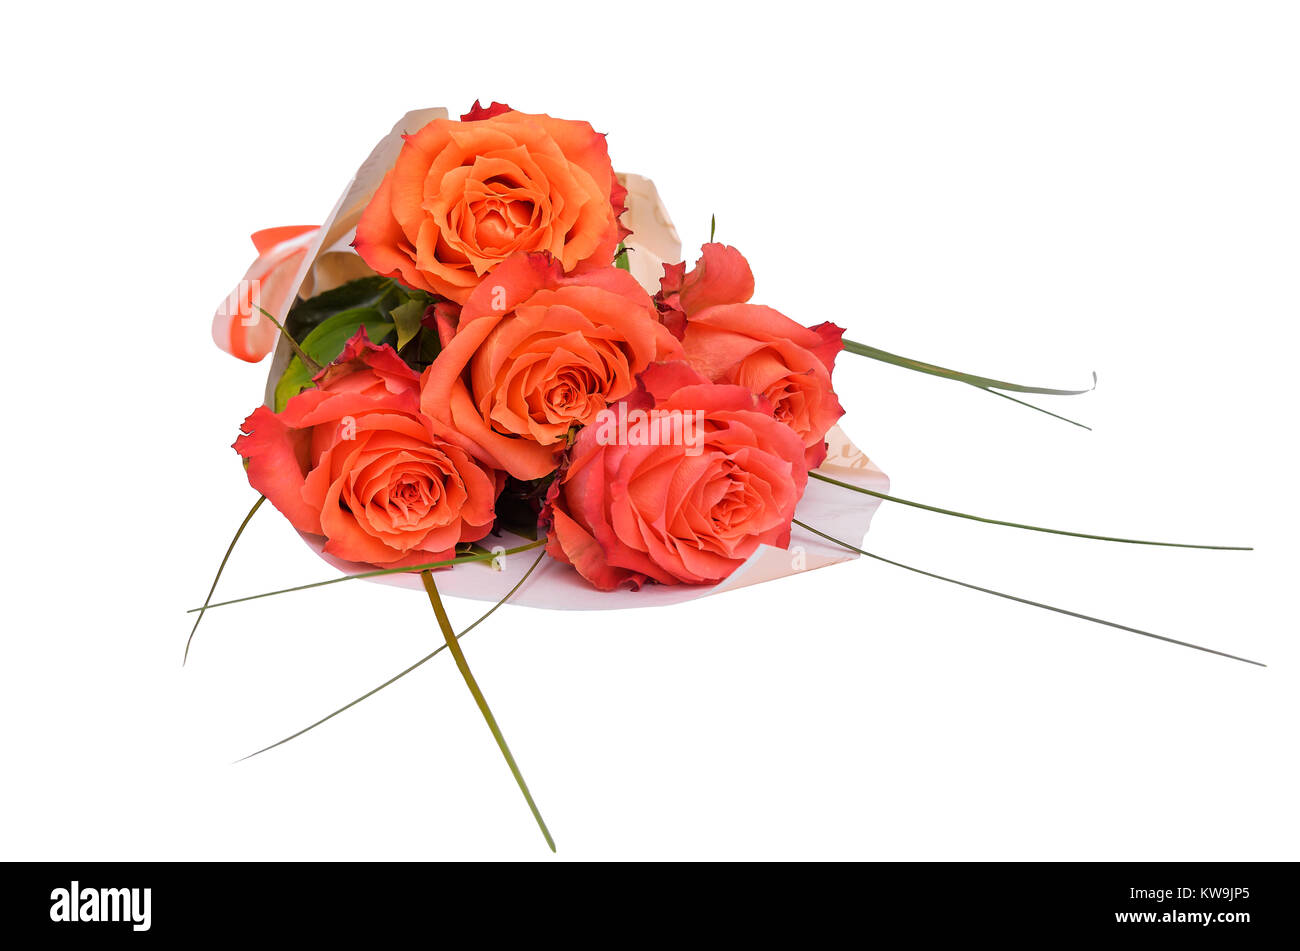 Artificial White Roses Bouquet in Wrapping Brown Craft Paper Isolate on  White Background with Space Stock Photo - Alamy